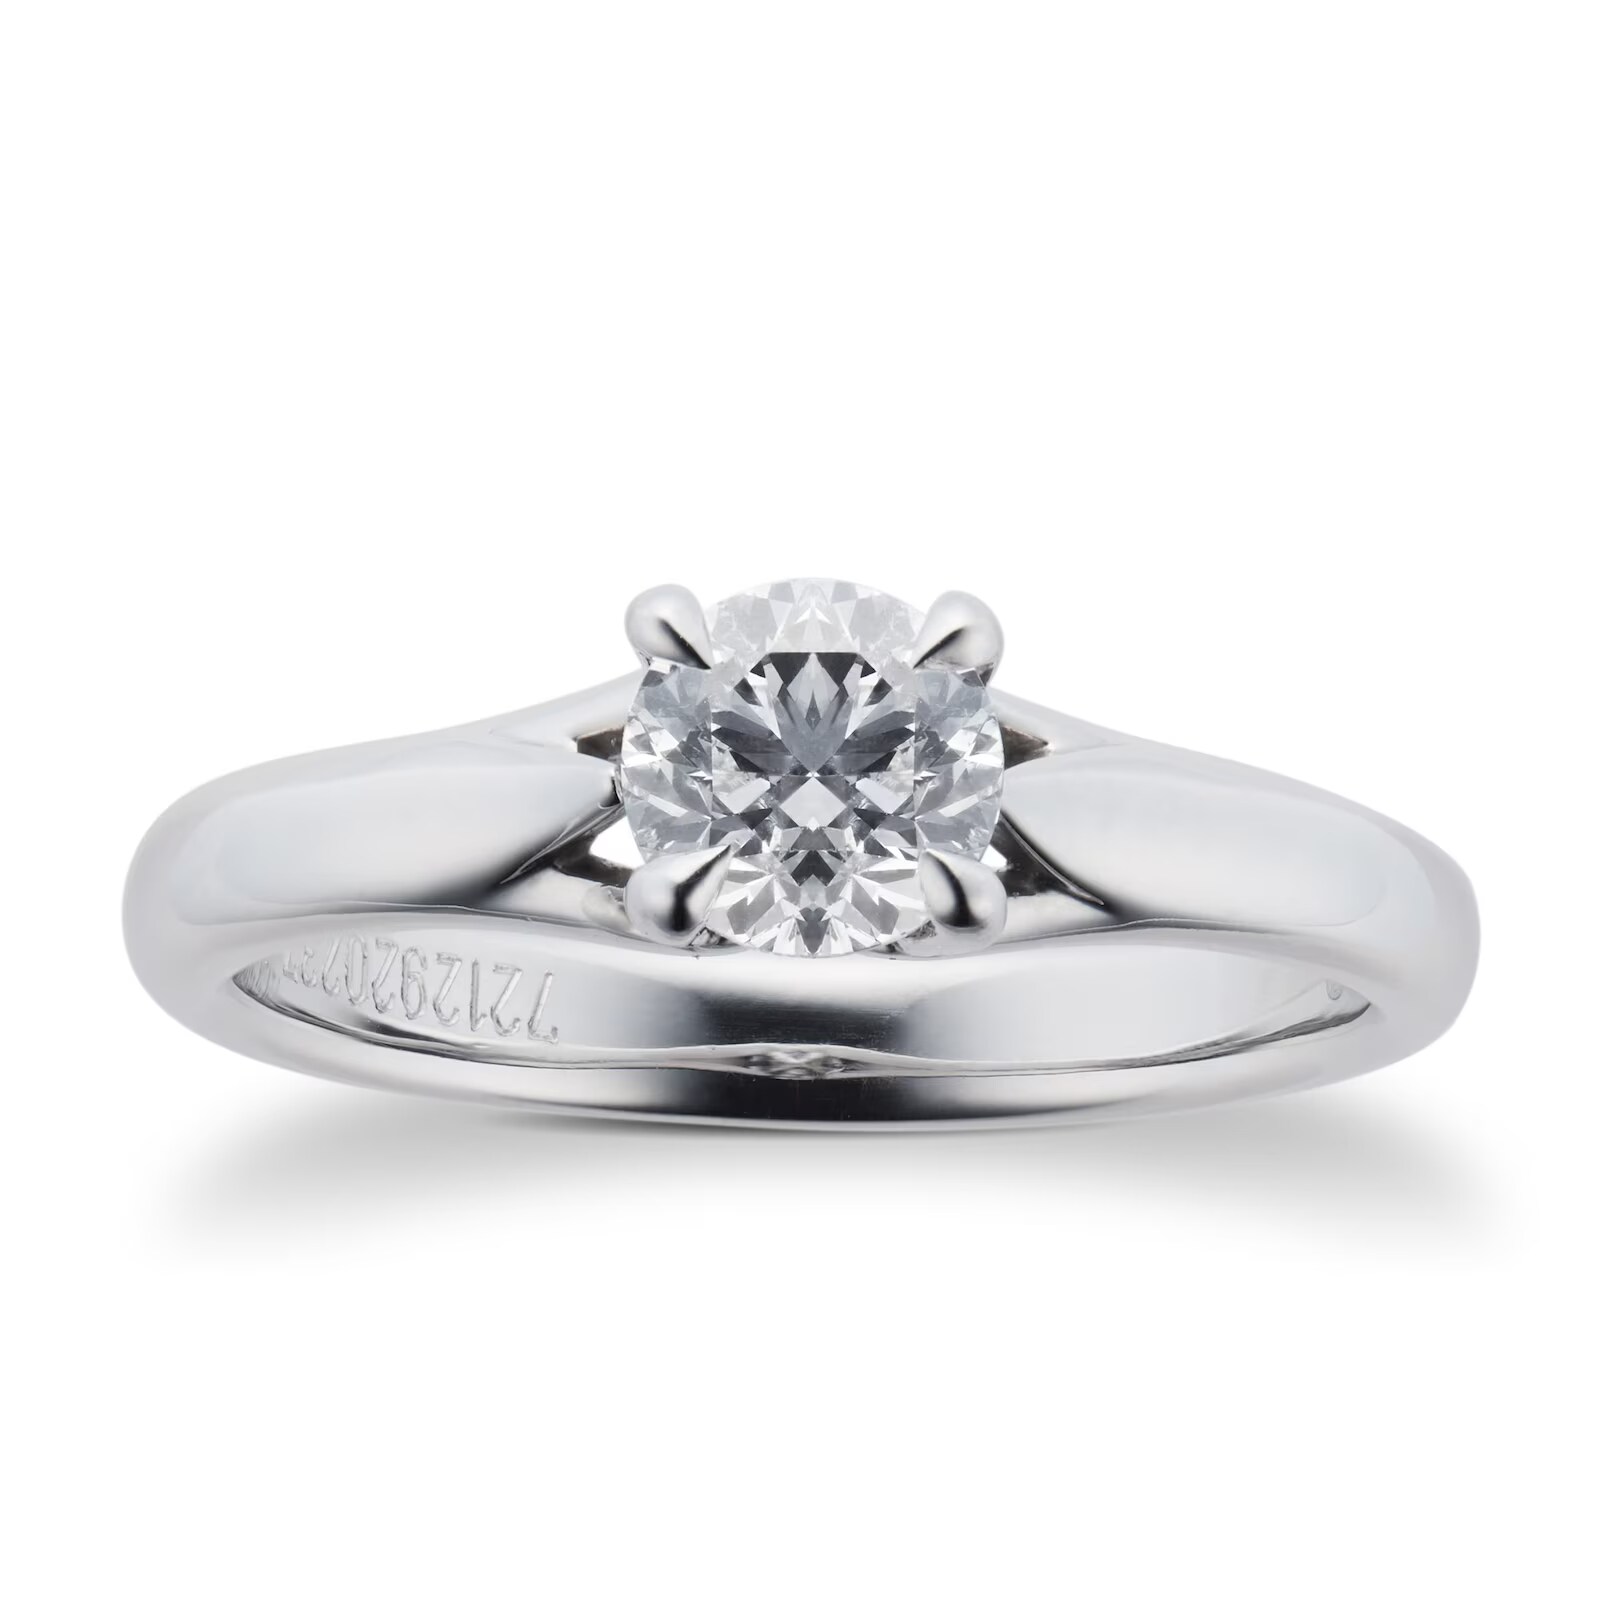 Ena Harkness Engagement Ring 0.70 Carat - Ring Size P